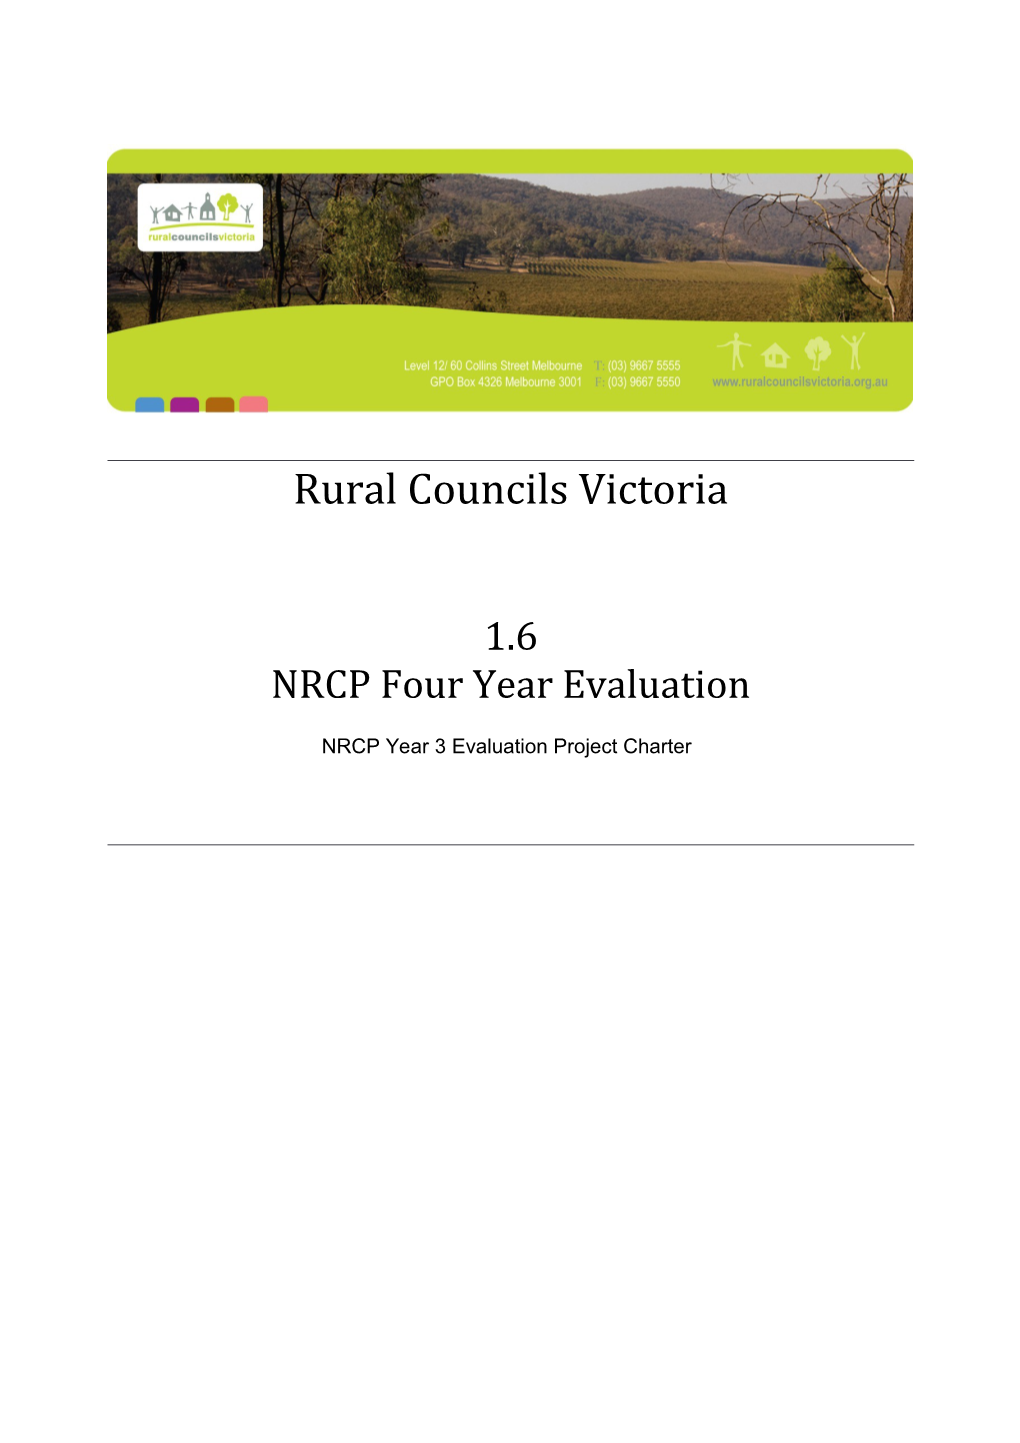 NRCP Year 3 Evaluation Project Charter